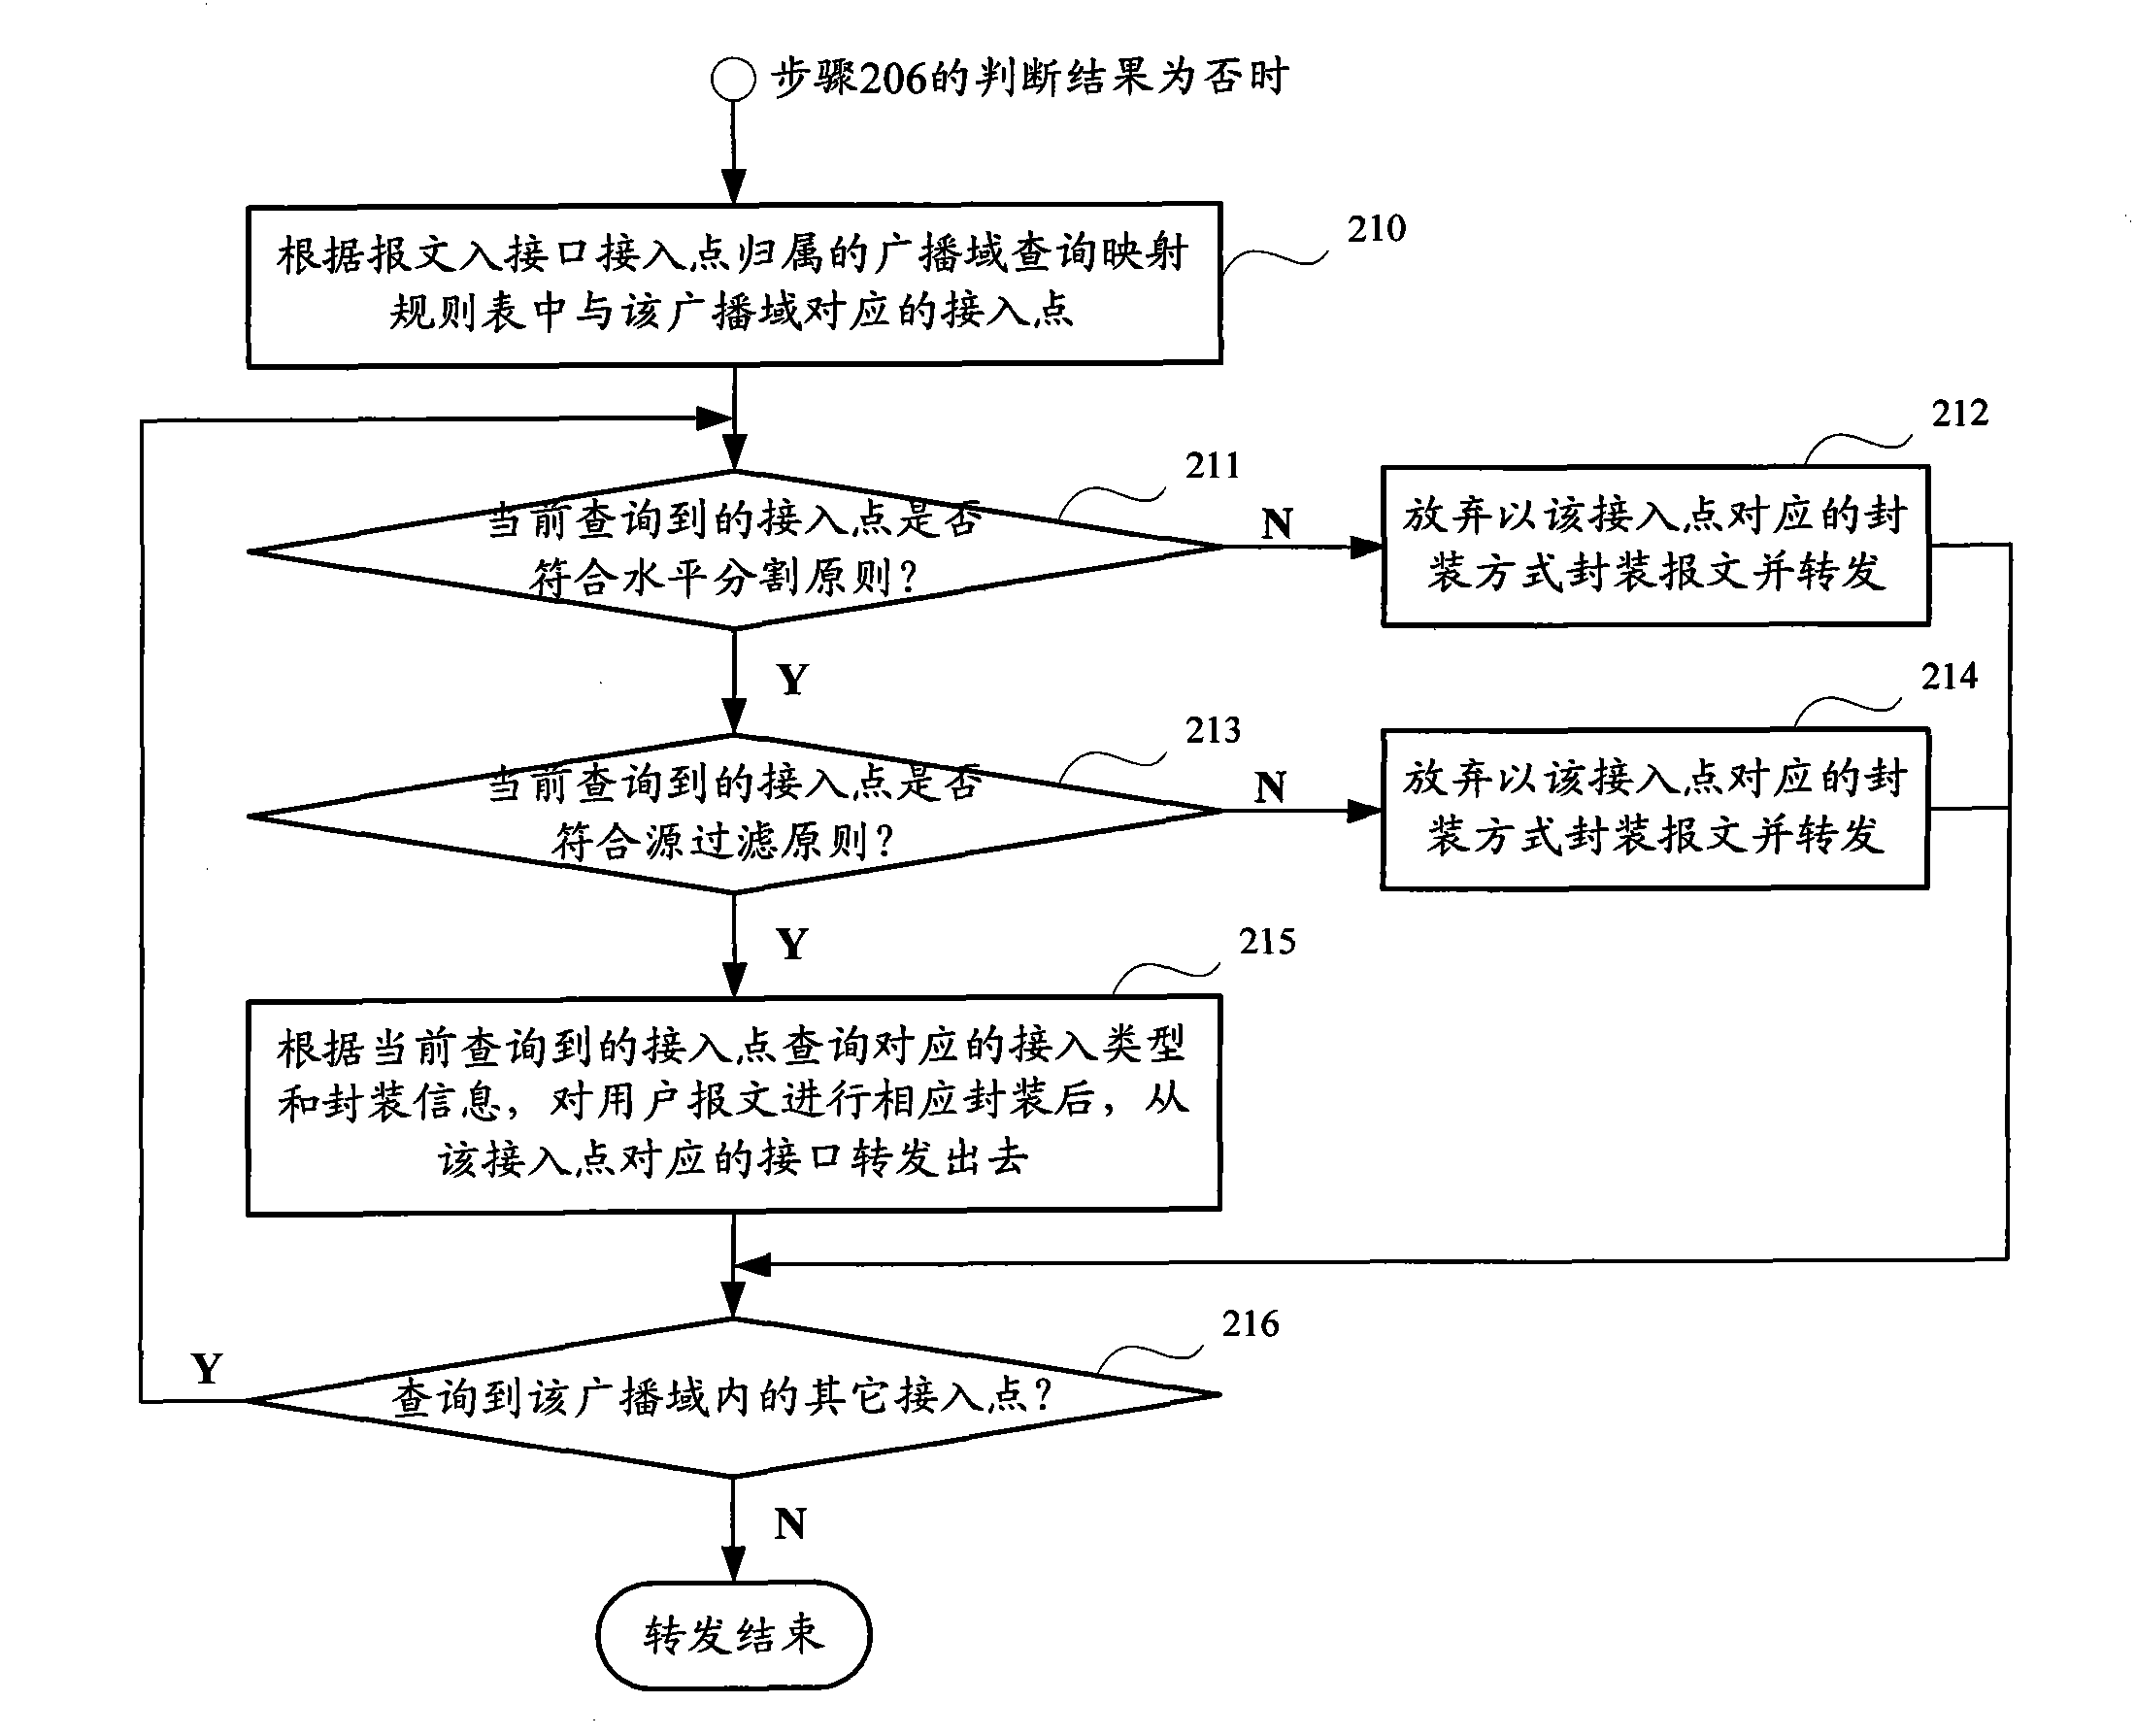 Method and device for double layered mutual communication in heterogeneous network